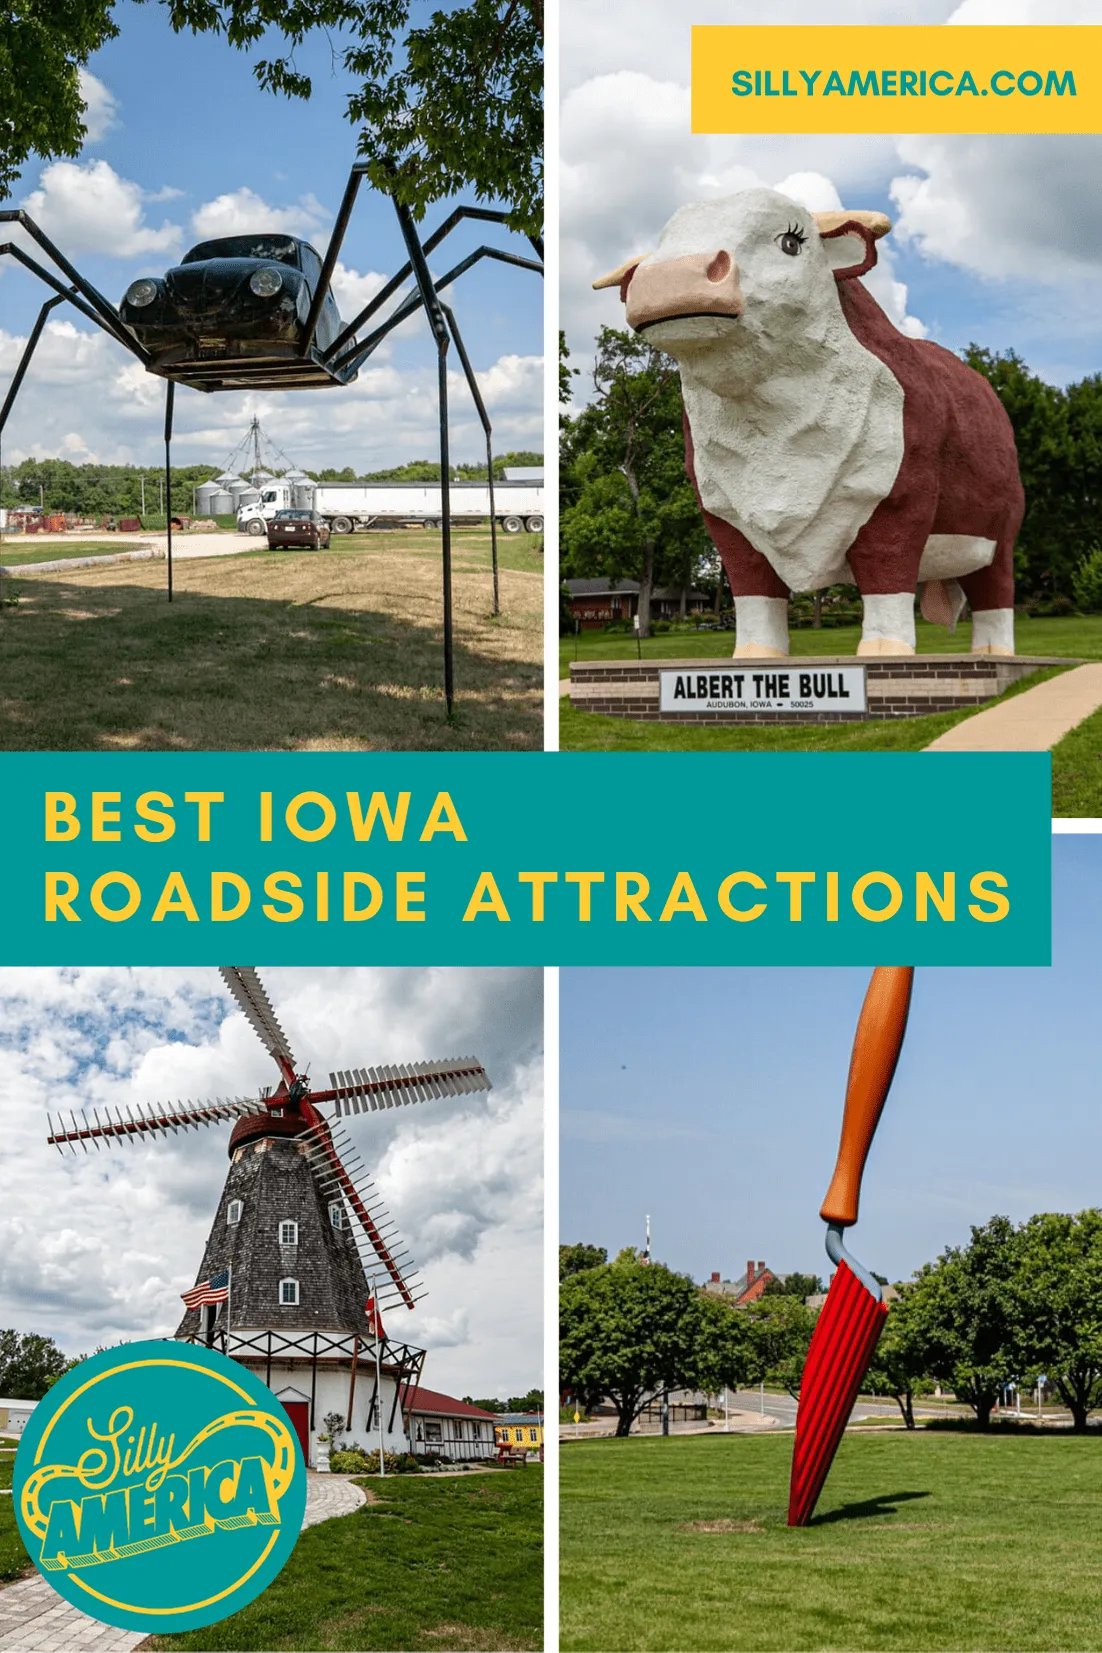 The best Iowa roadside attractions to visit on an Iowa road trip or weekend getaway. Add these roadside oddities and road trip stops to your bucket list and visit these roadside attractions in Iowa on your next travel adventure.  #IowaRoadsideAttractions #IowaRoadsideAttraction #RoadsideAttractions #RoadsideAttraction #RoadTrip #IowaRoadTrip #IowaThingsToDo #IowaRoadTripBucketLists #IowaBucketList #IowaRoadTripIdeas #IowaWaterfallsRoadTrip #IowaTravel #WeirdRoadsideAttractions